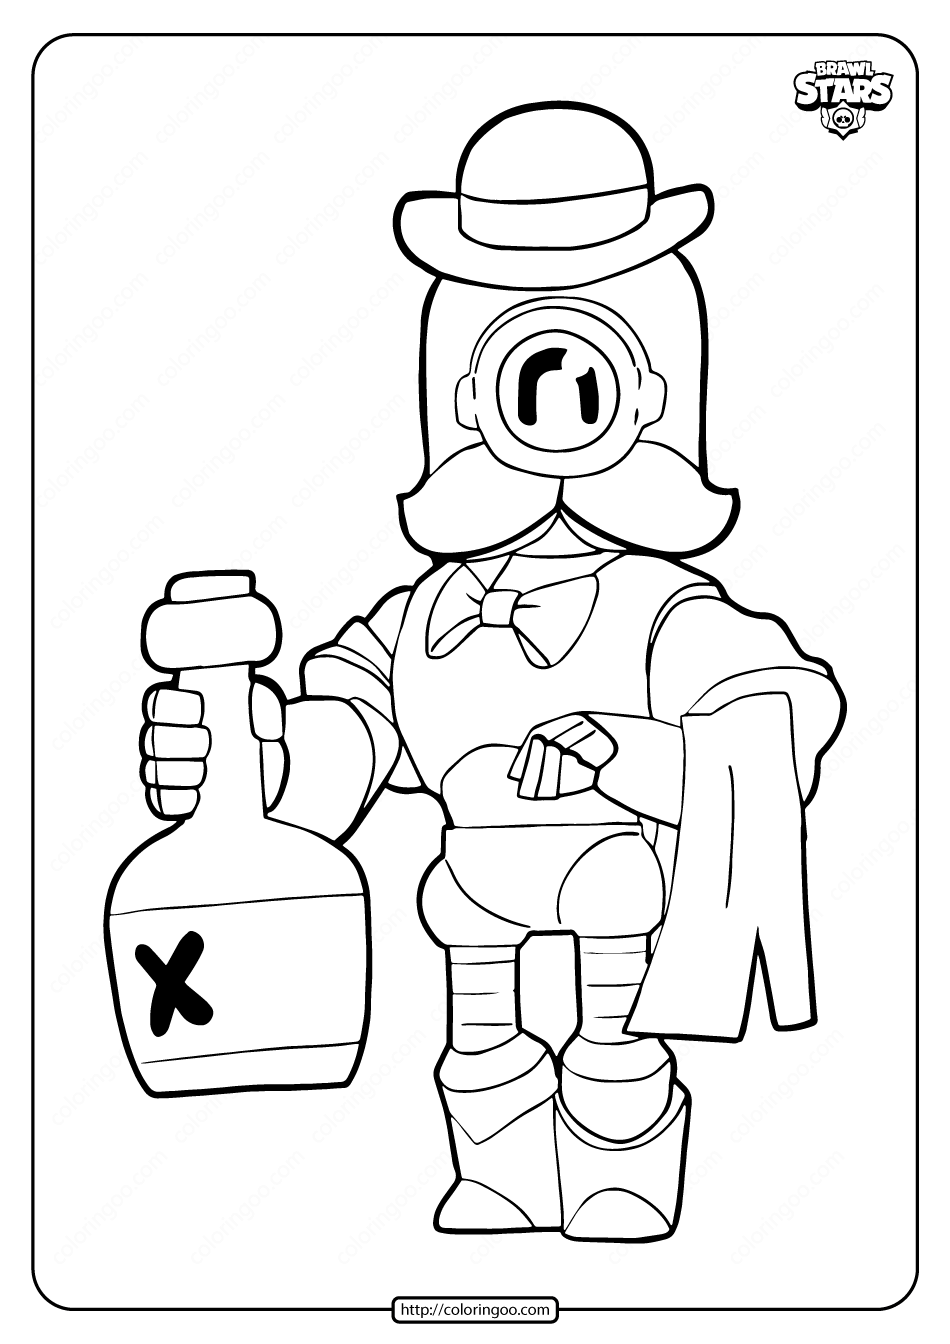 Wizard Barley Brawl Stars Coloring Pages